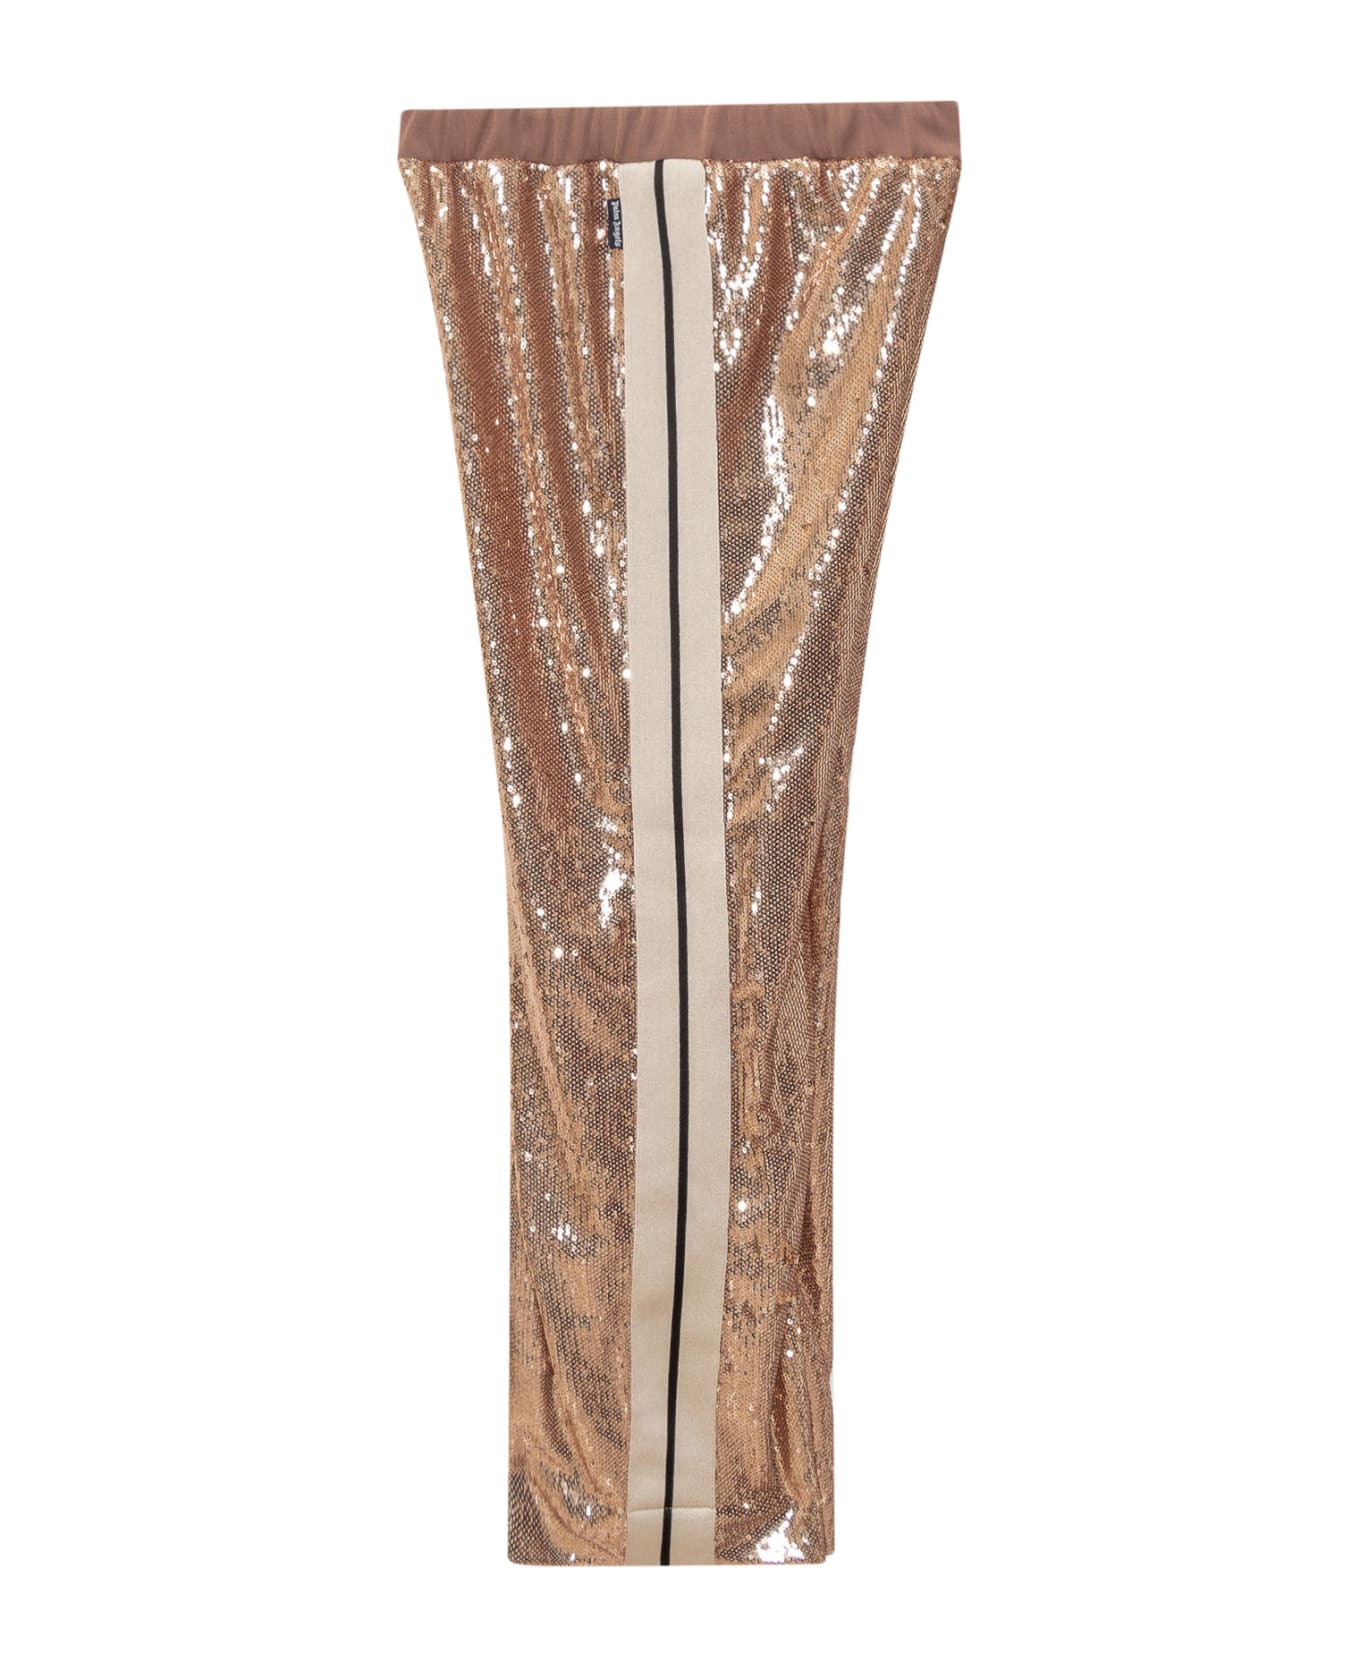 Palm Angels Pants With Sequins - BRONZE PIN ボトムス